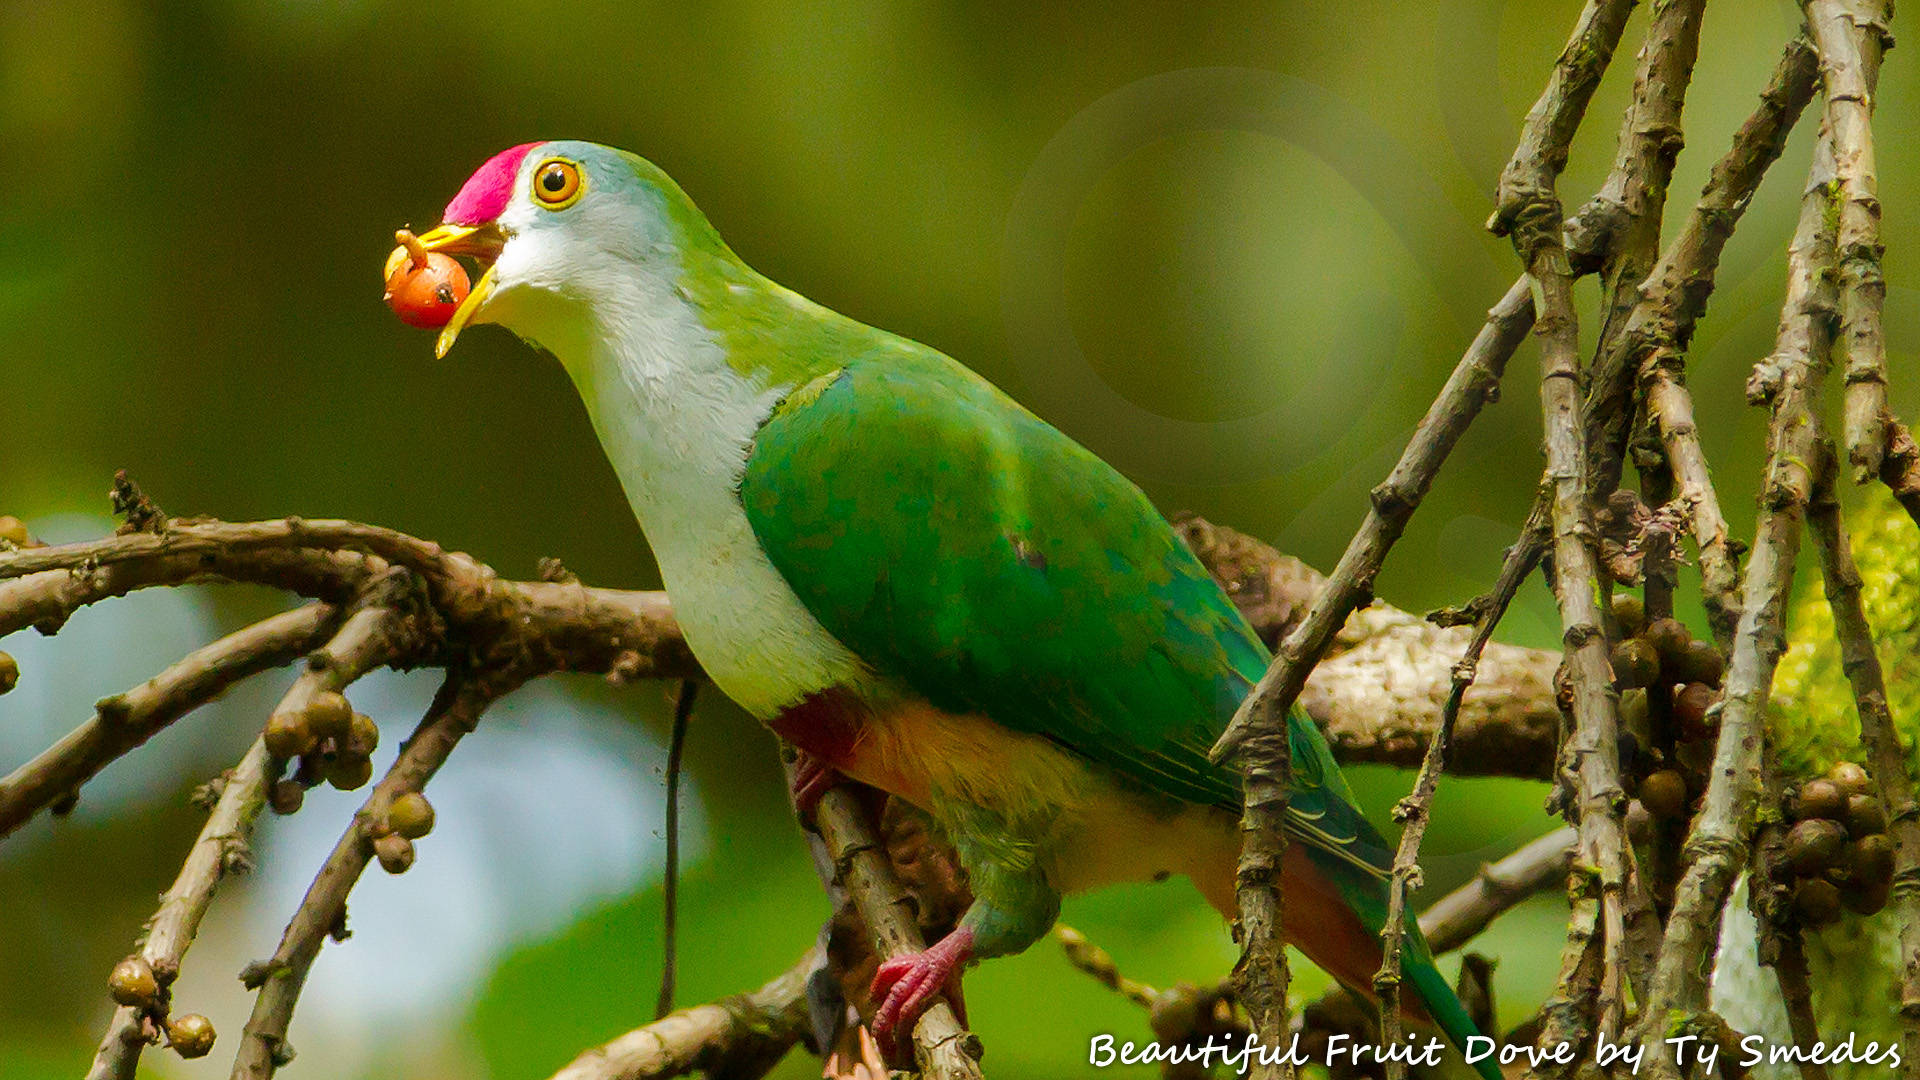 The lowland-dwelling Beautiful Fruit Dove Ptilinopus pulchellus is one of 288 New Guinea endemics in West Papua that always is a thrill to see. Copyright © Ty Smedes